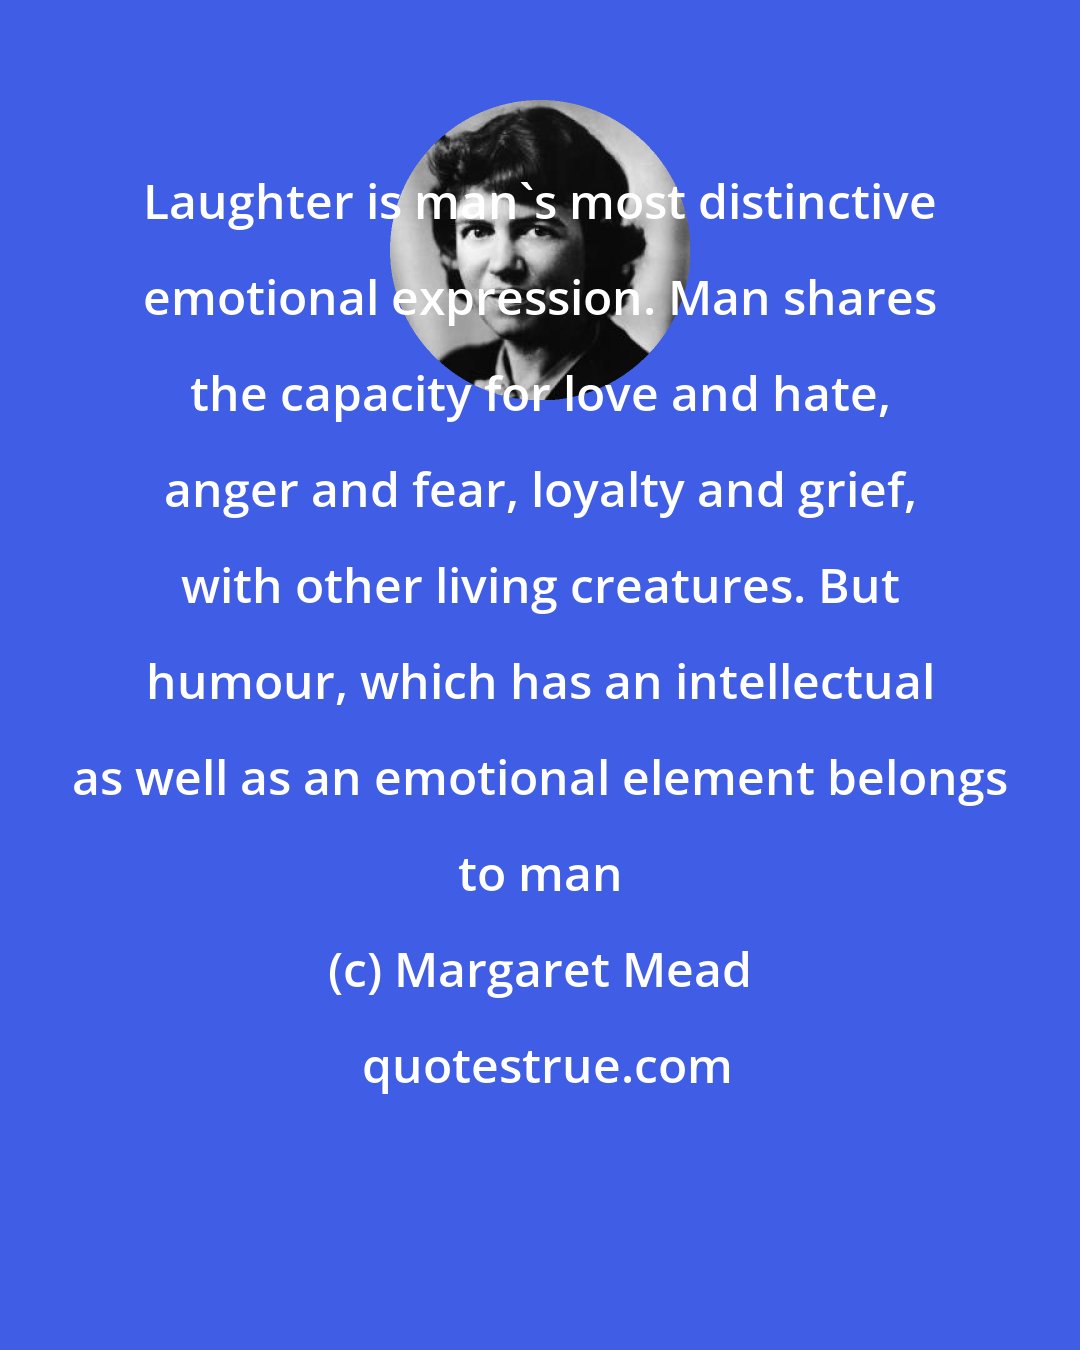 Margaret Mead: Laughter is man's most distinctive emotional expression. Man shares the capacity for love and hate, anger and fear, loyalty and grief, with other living creatures. But humour, which has an intellectual as well as an emotional element belongs to man